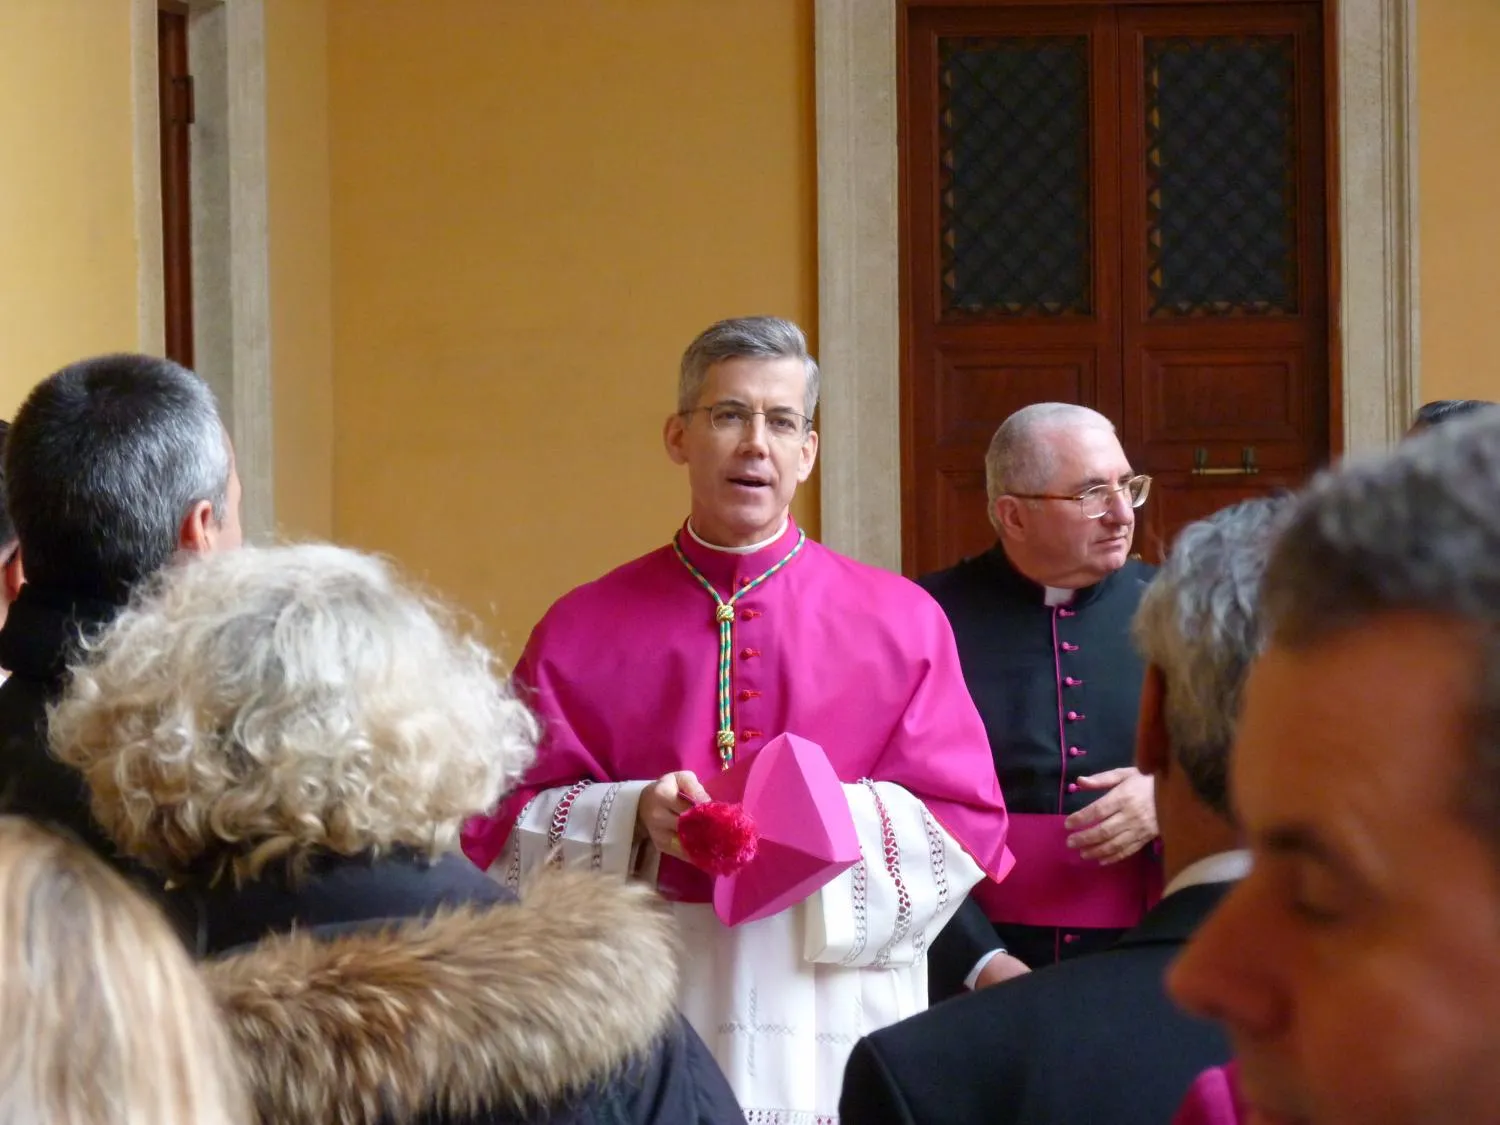 Archbishop Charles Brown, apostolic nuncio to the Philippines, at a reception following his episcopal consecration in January 2012. ?w=200&h=150